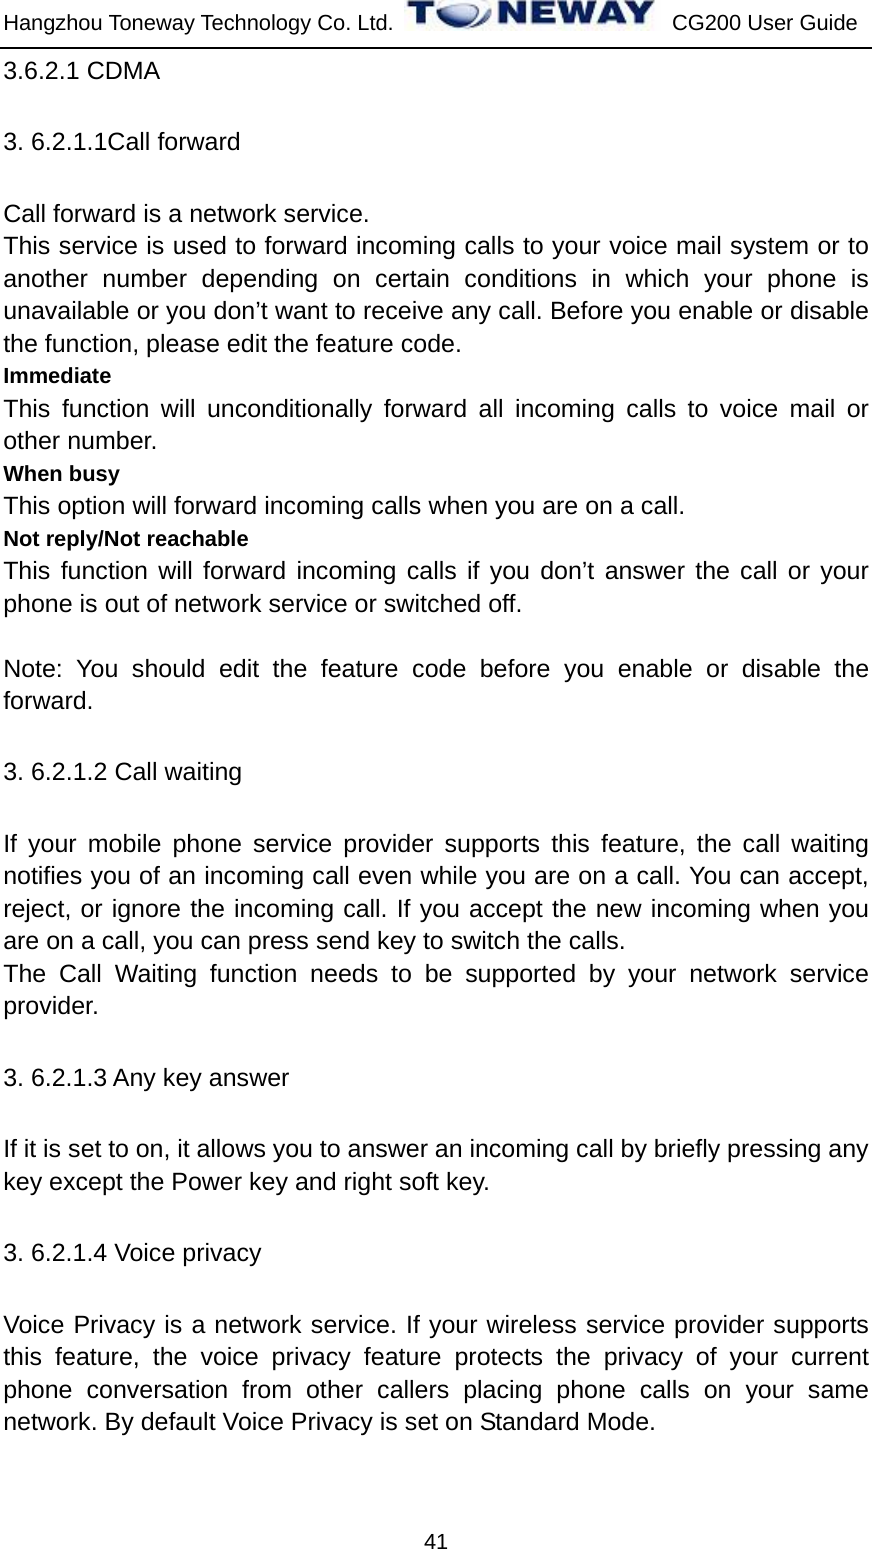 Hangzhou Toneway Technology Co. Ltd.    CG200 User Guide 41 3.6.2.1 CDMA 3. 6.2.1.1Call forward Call forward is a network service.   This service is used to forward incoming calls to your voice mail system or to another number depending on certain conditions in which your phone is unavailable or you don’t want to receive any call. Before you enable or disable   the function, please edit the feature code. Immediate This function will unconditionally forward all incoming calls to voice mail or other number. When busy This option will forward incoming calls when you are on a call. Not reply/Not reachable This function will forward incoming calls if you don’t answer the call or your phone is out of network service or switched off.  Note: You should edit the feature code before you enable or disable the forward. 3. 6.2.1.2 Call waiting   If your mobile phone service provider supports this feature, the call waiting notifies you of an incoming call even while you are on a call. You can accept, reject, or ignore the incoming call. If you accept the new incoming when you are on a call, you can press send key to switch the calls. The Call Waiting function needs to be supported by your network service provider. 3. 6.2.1.3 Any key answer If it is set to on, it allows you to answer an incoming call by briefly pressing any key except the Power key and right soft key. 3. 6.2.1.4 Voice privacy Voice Privacy is a network service. If your wireless service provider supports this feature, the voice privacy feature protects the privacy of your current phone conversation from other callers placing phone calls on your same network. By default Voice Privacy is set on Standard Mode. 